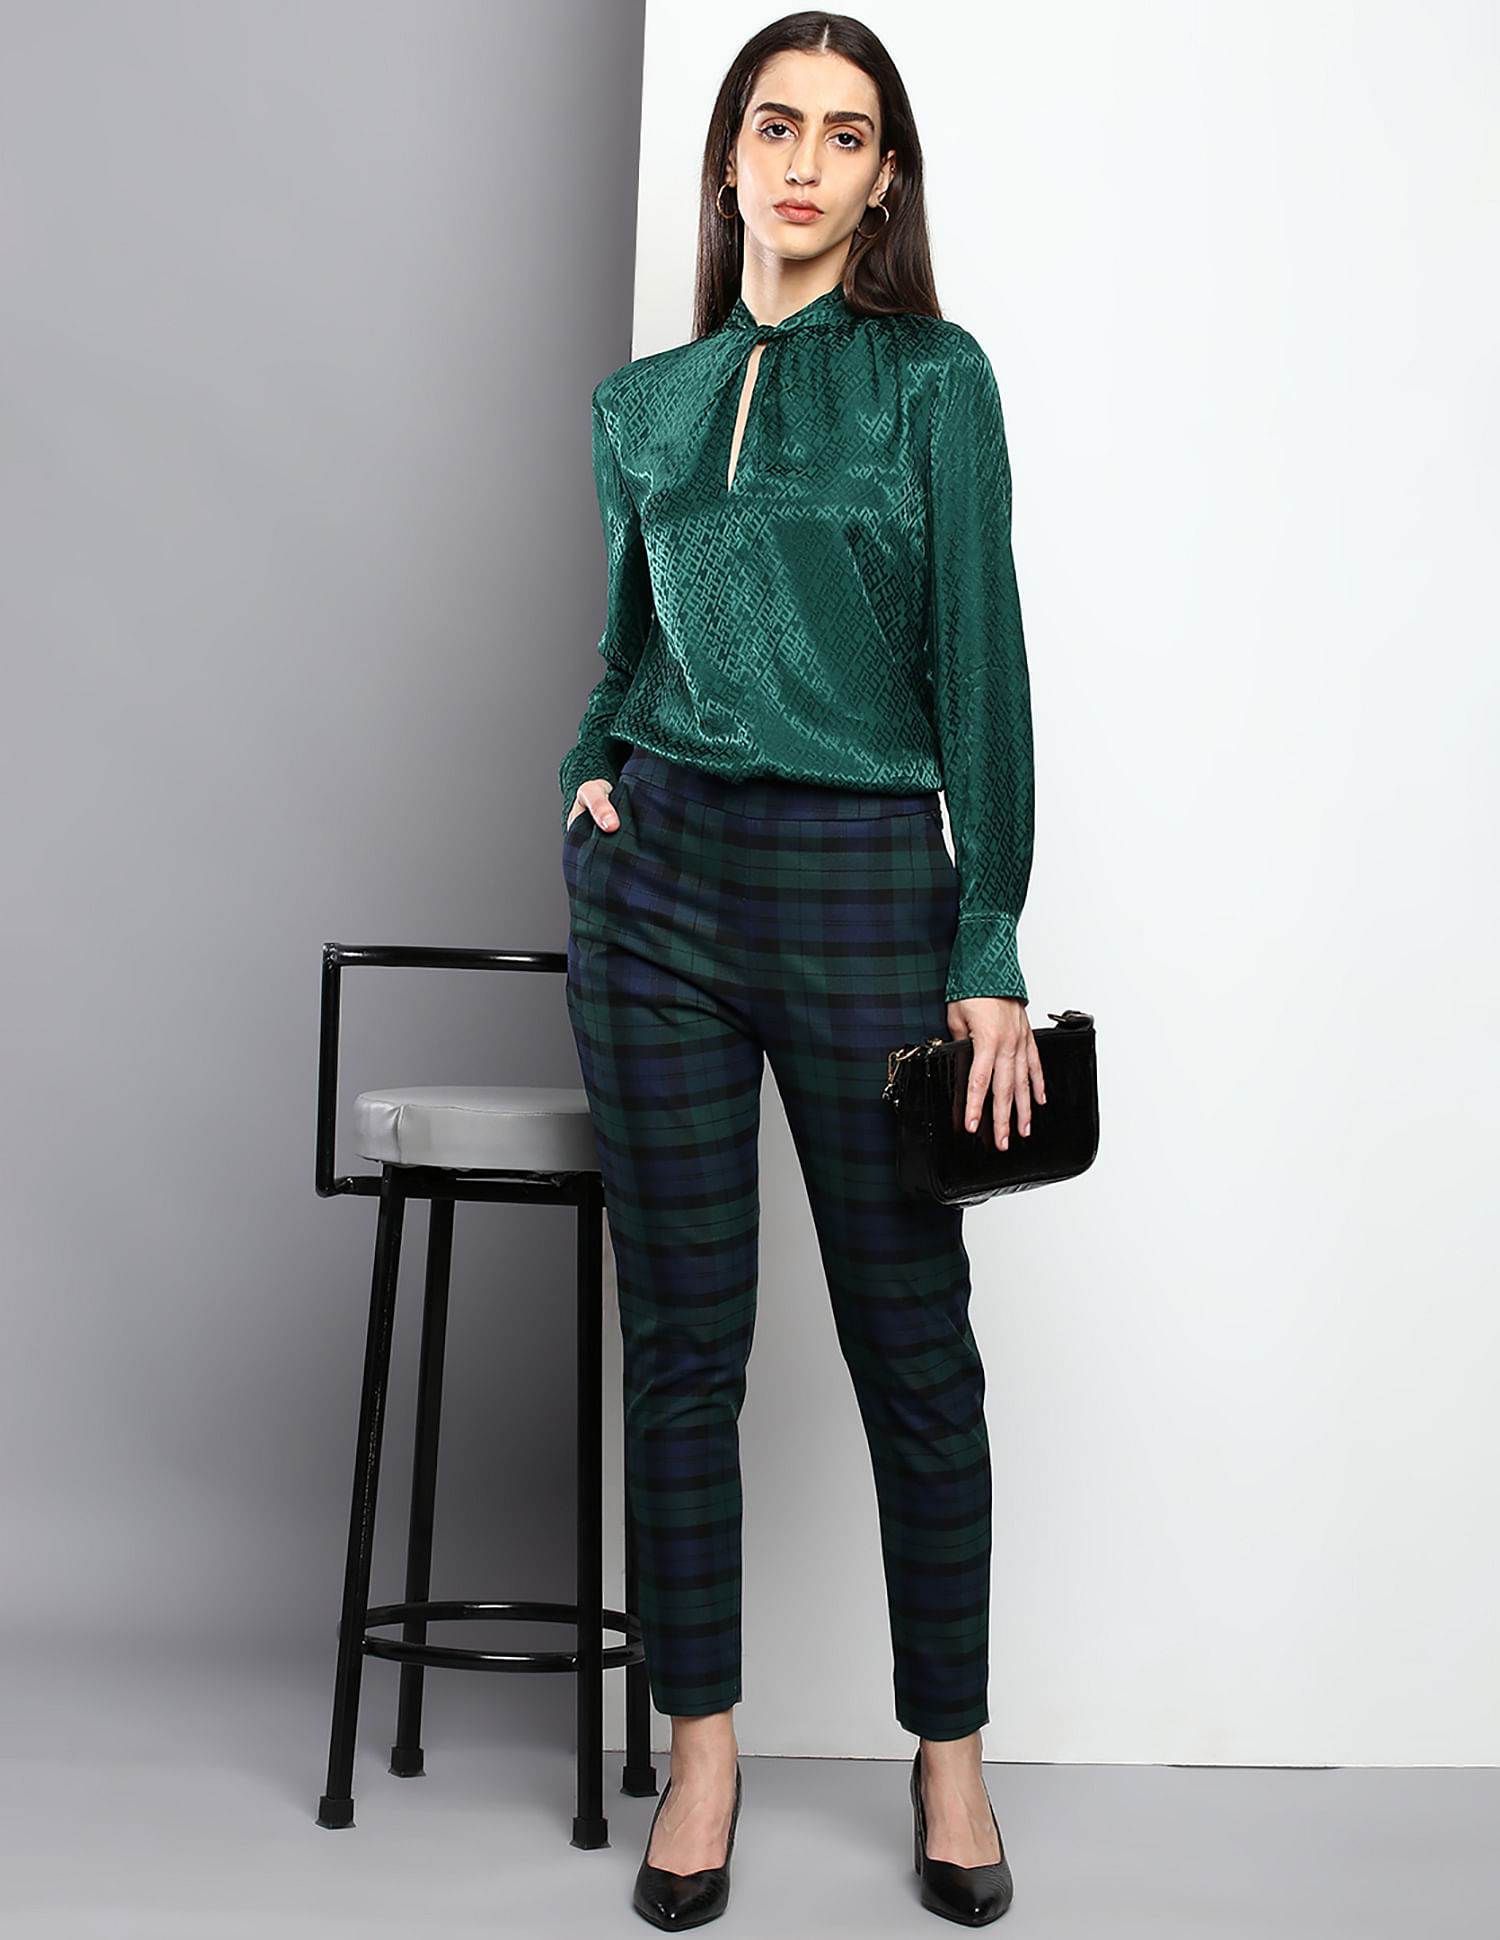 Zara High Waist Belted Plaid Check Trousers